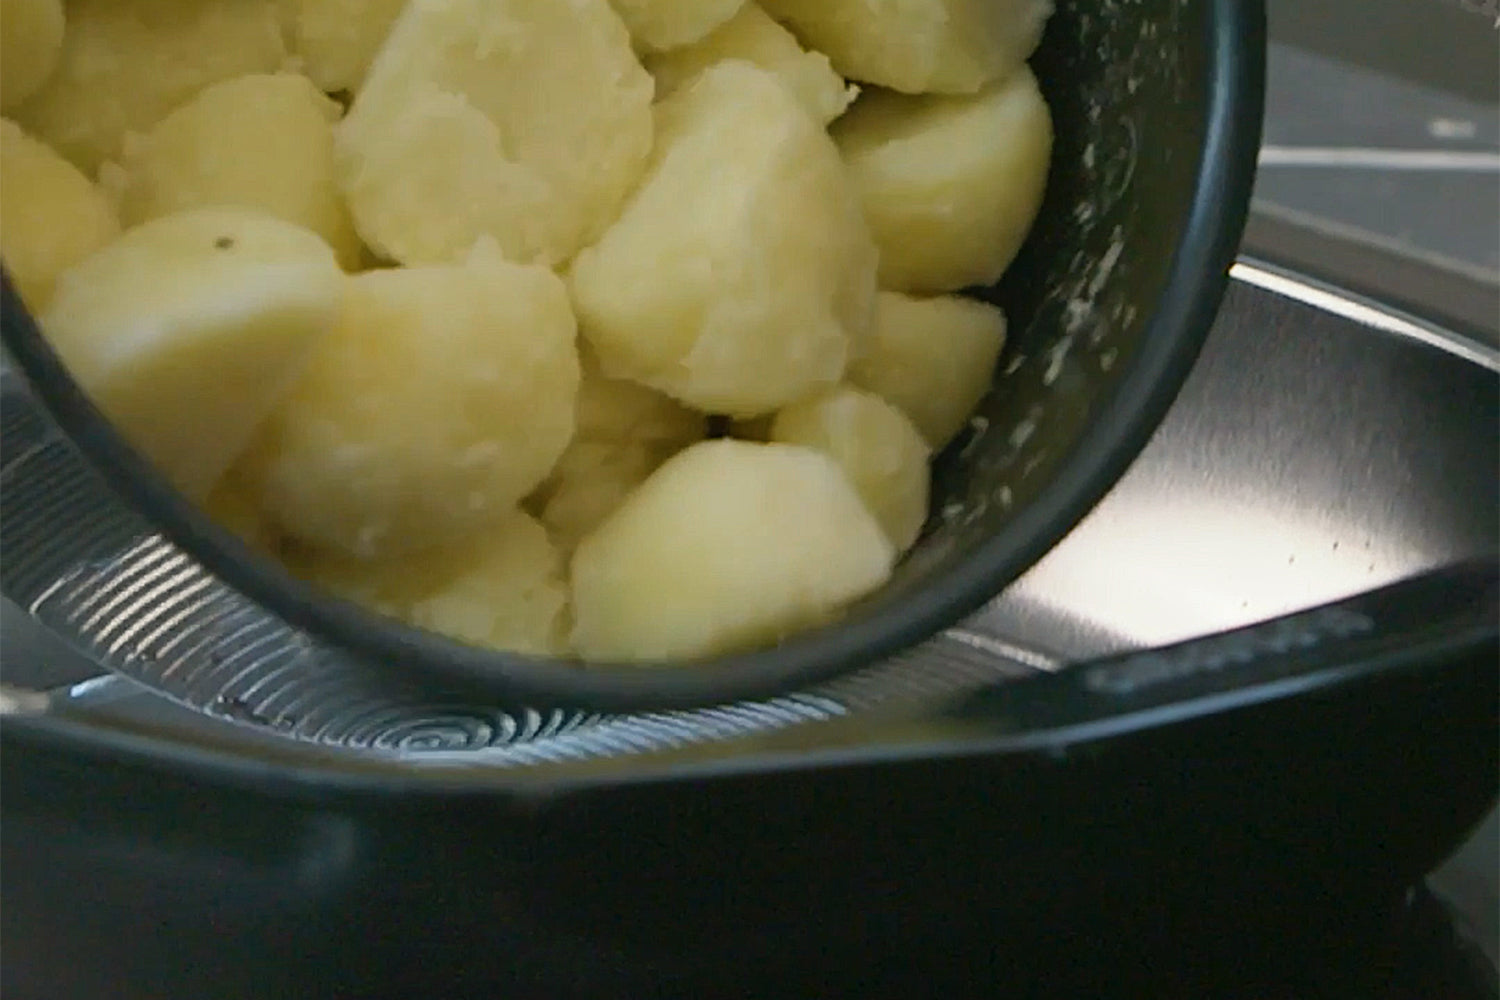 Add your potatoes to the Circulon roasting tray